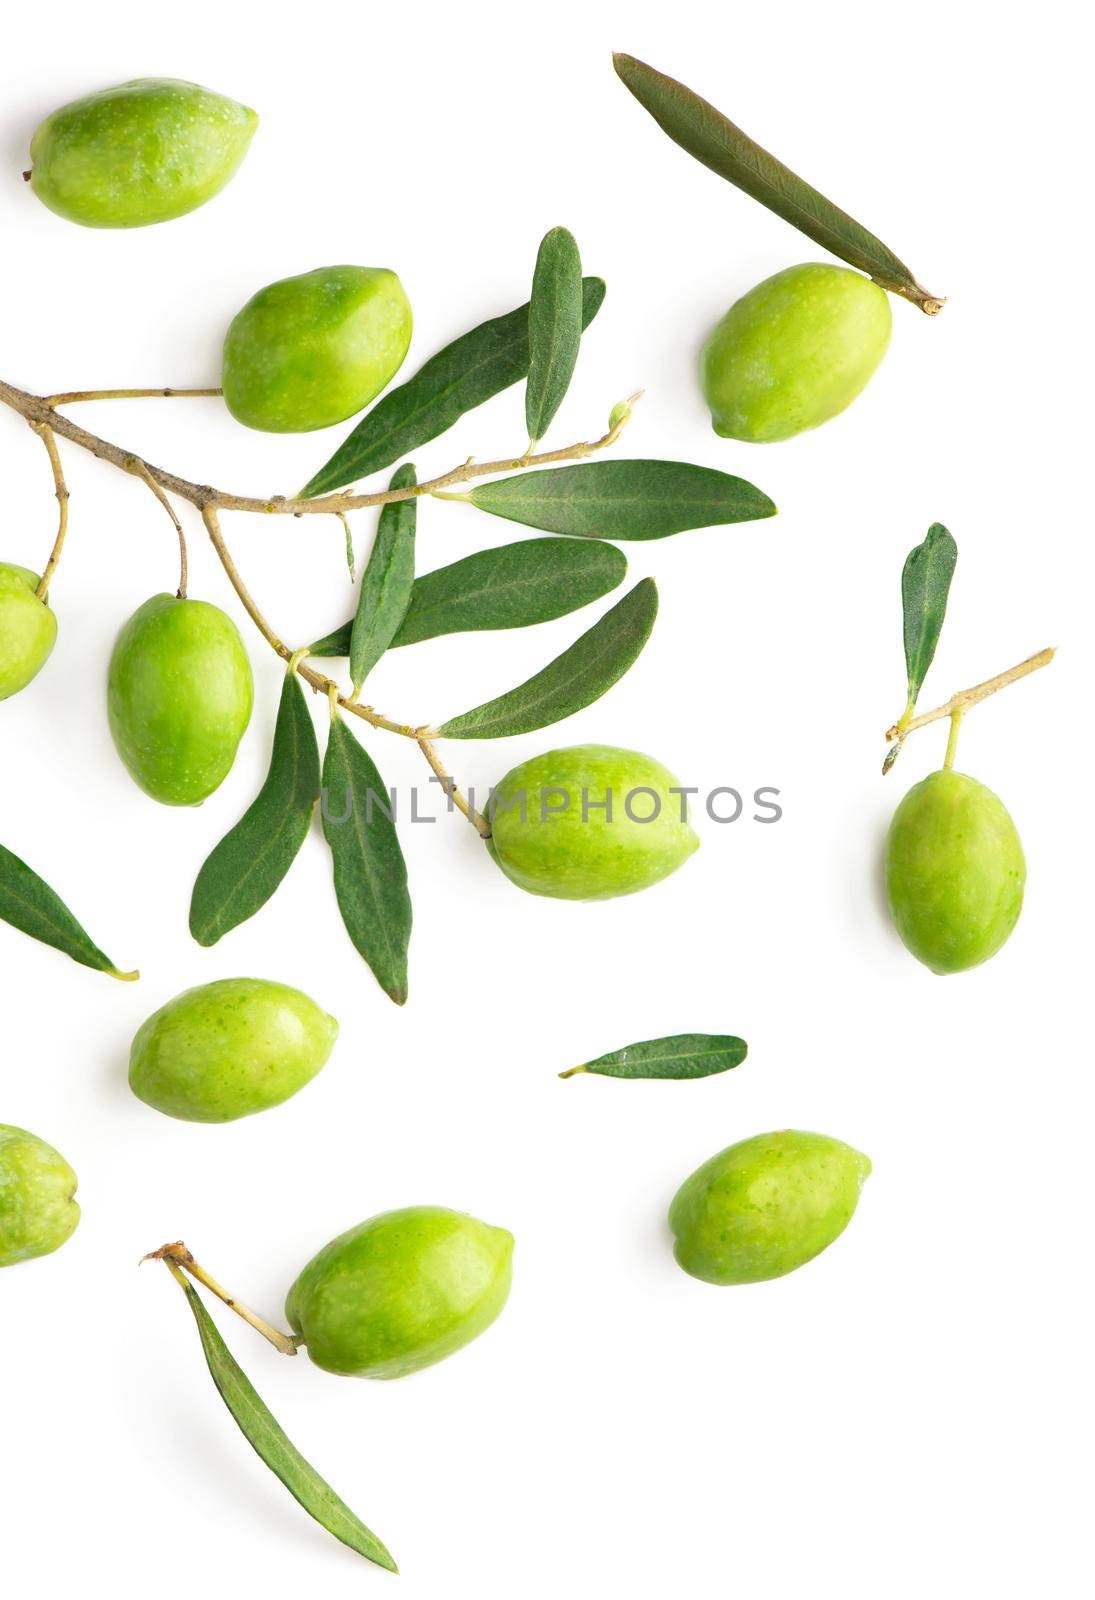 Olive fruit and olive leaves on a white background by aprilphoto